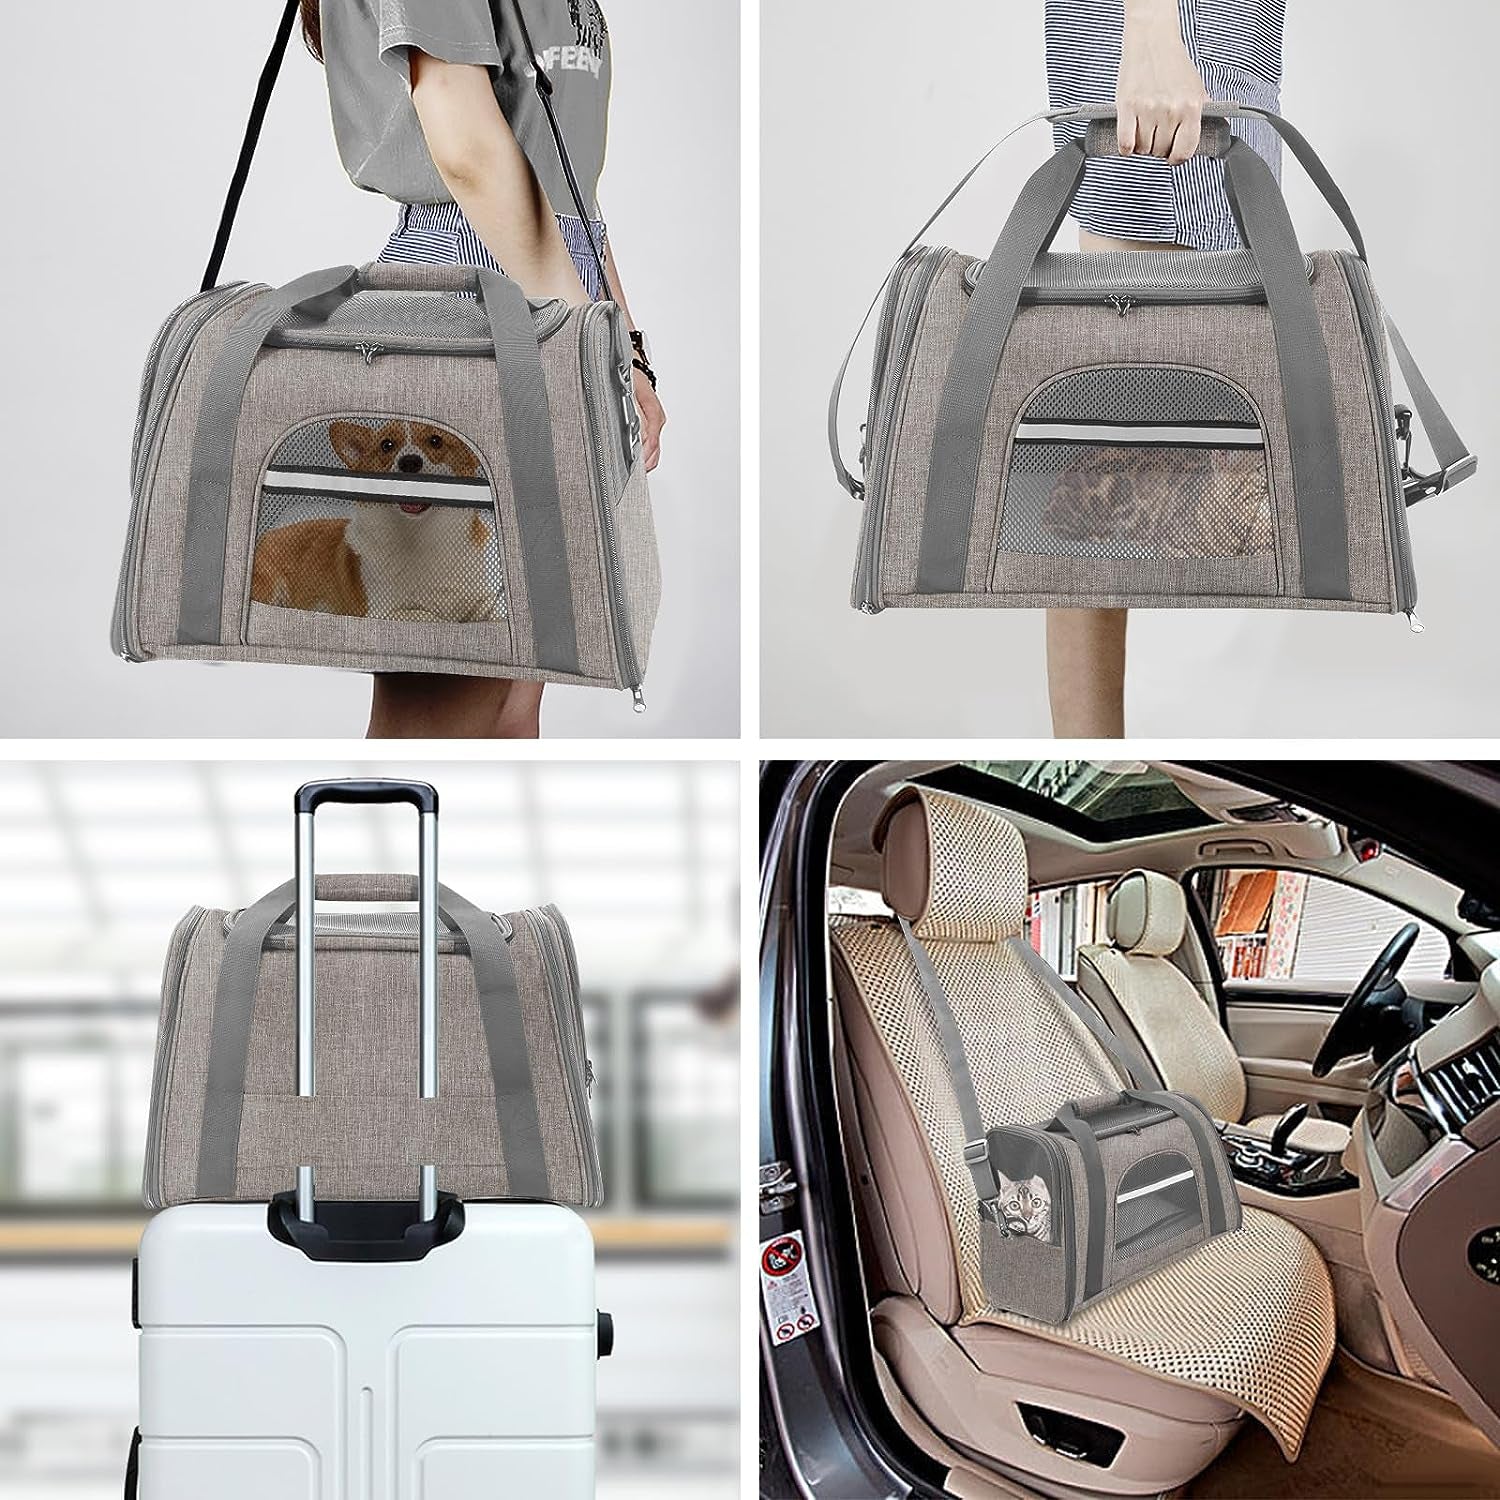 Pet Carrier Airline Approved Pet Carrier Dog Carriers for Small Dogs, Cat Carriers for Medium Cat Small Cat, Small Pet Carrier Small Dog Carrier Airline Approved Cat Pet Travel Carrier